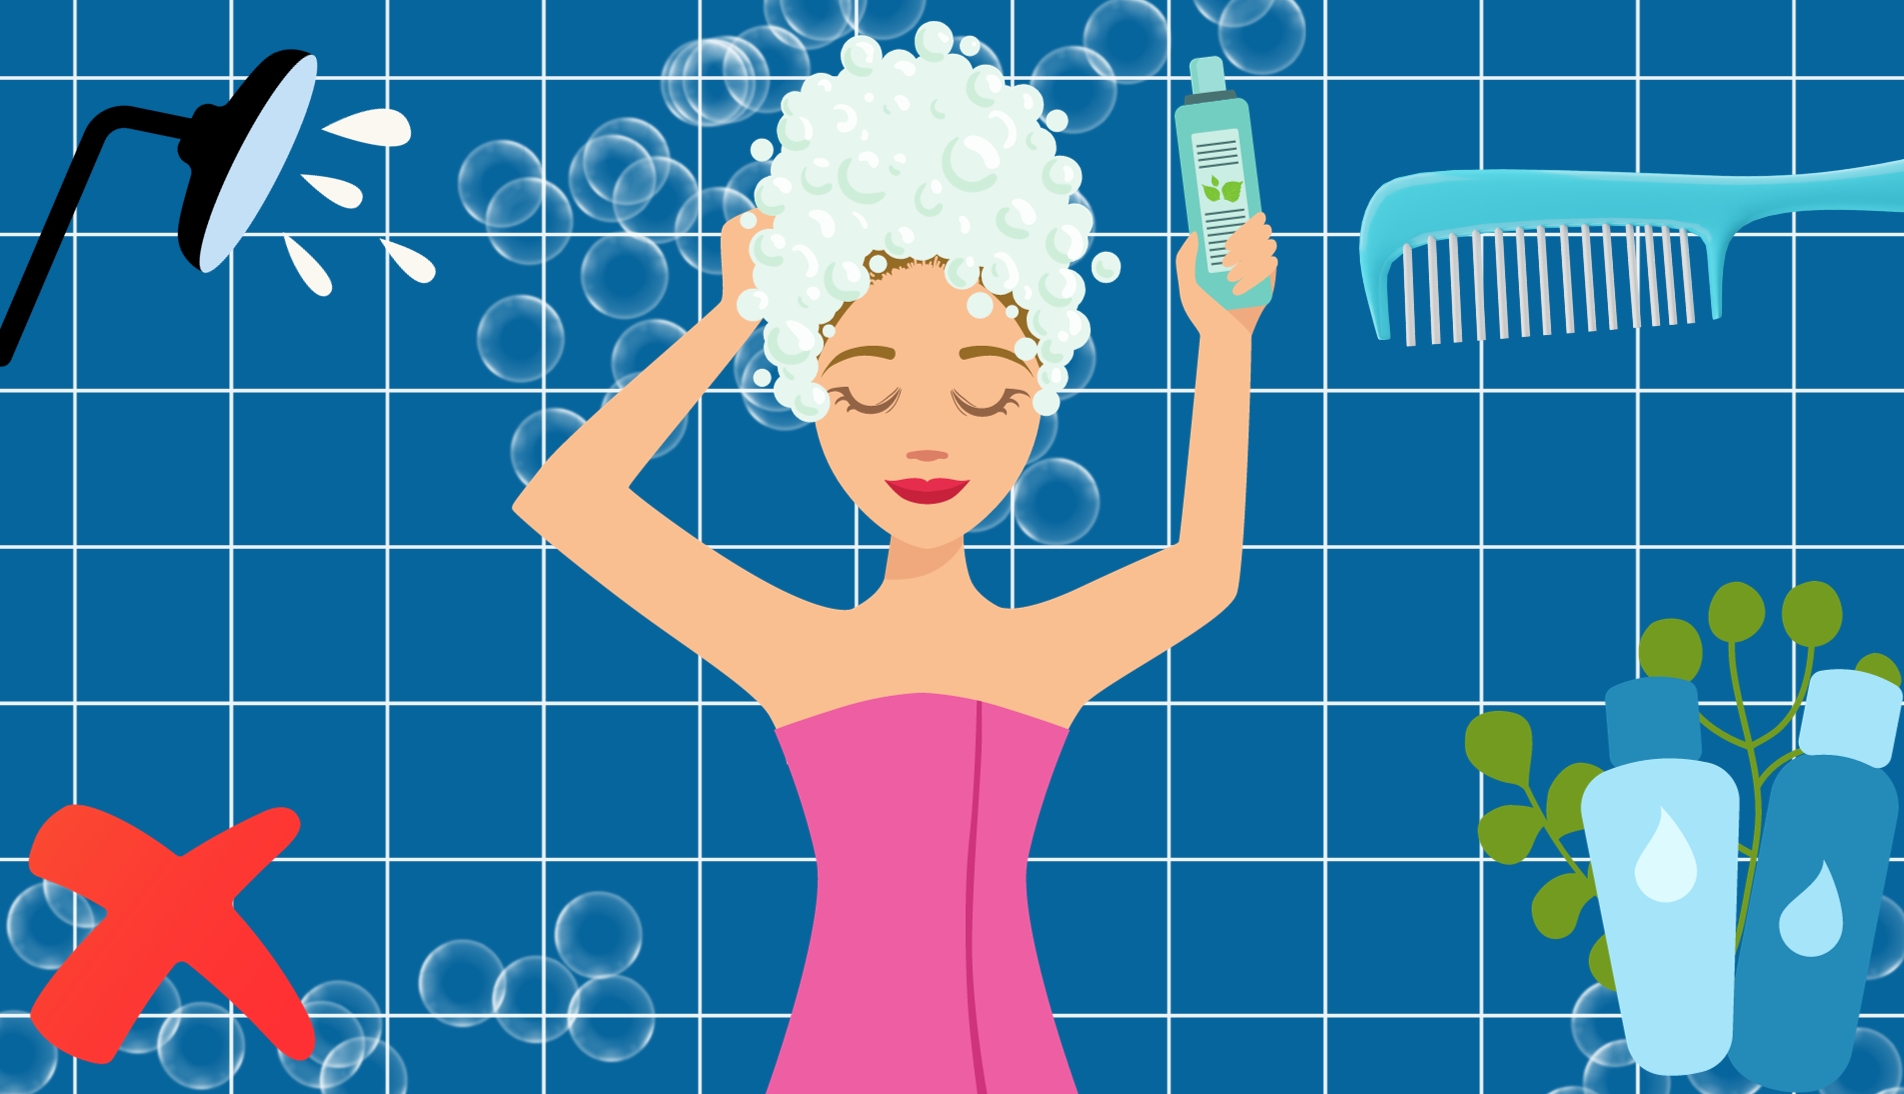 Illustration of various hair shampoo bottles with a caution sign.